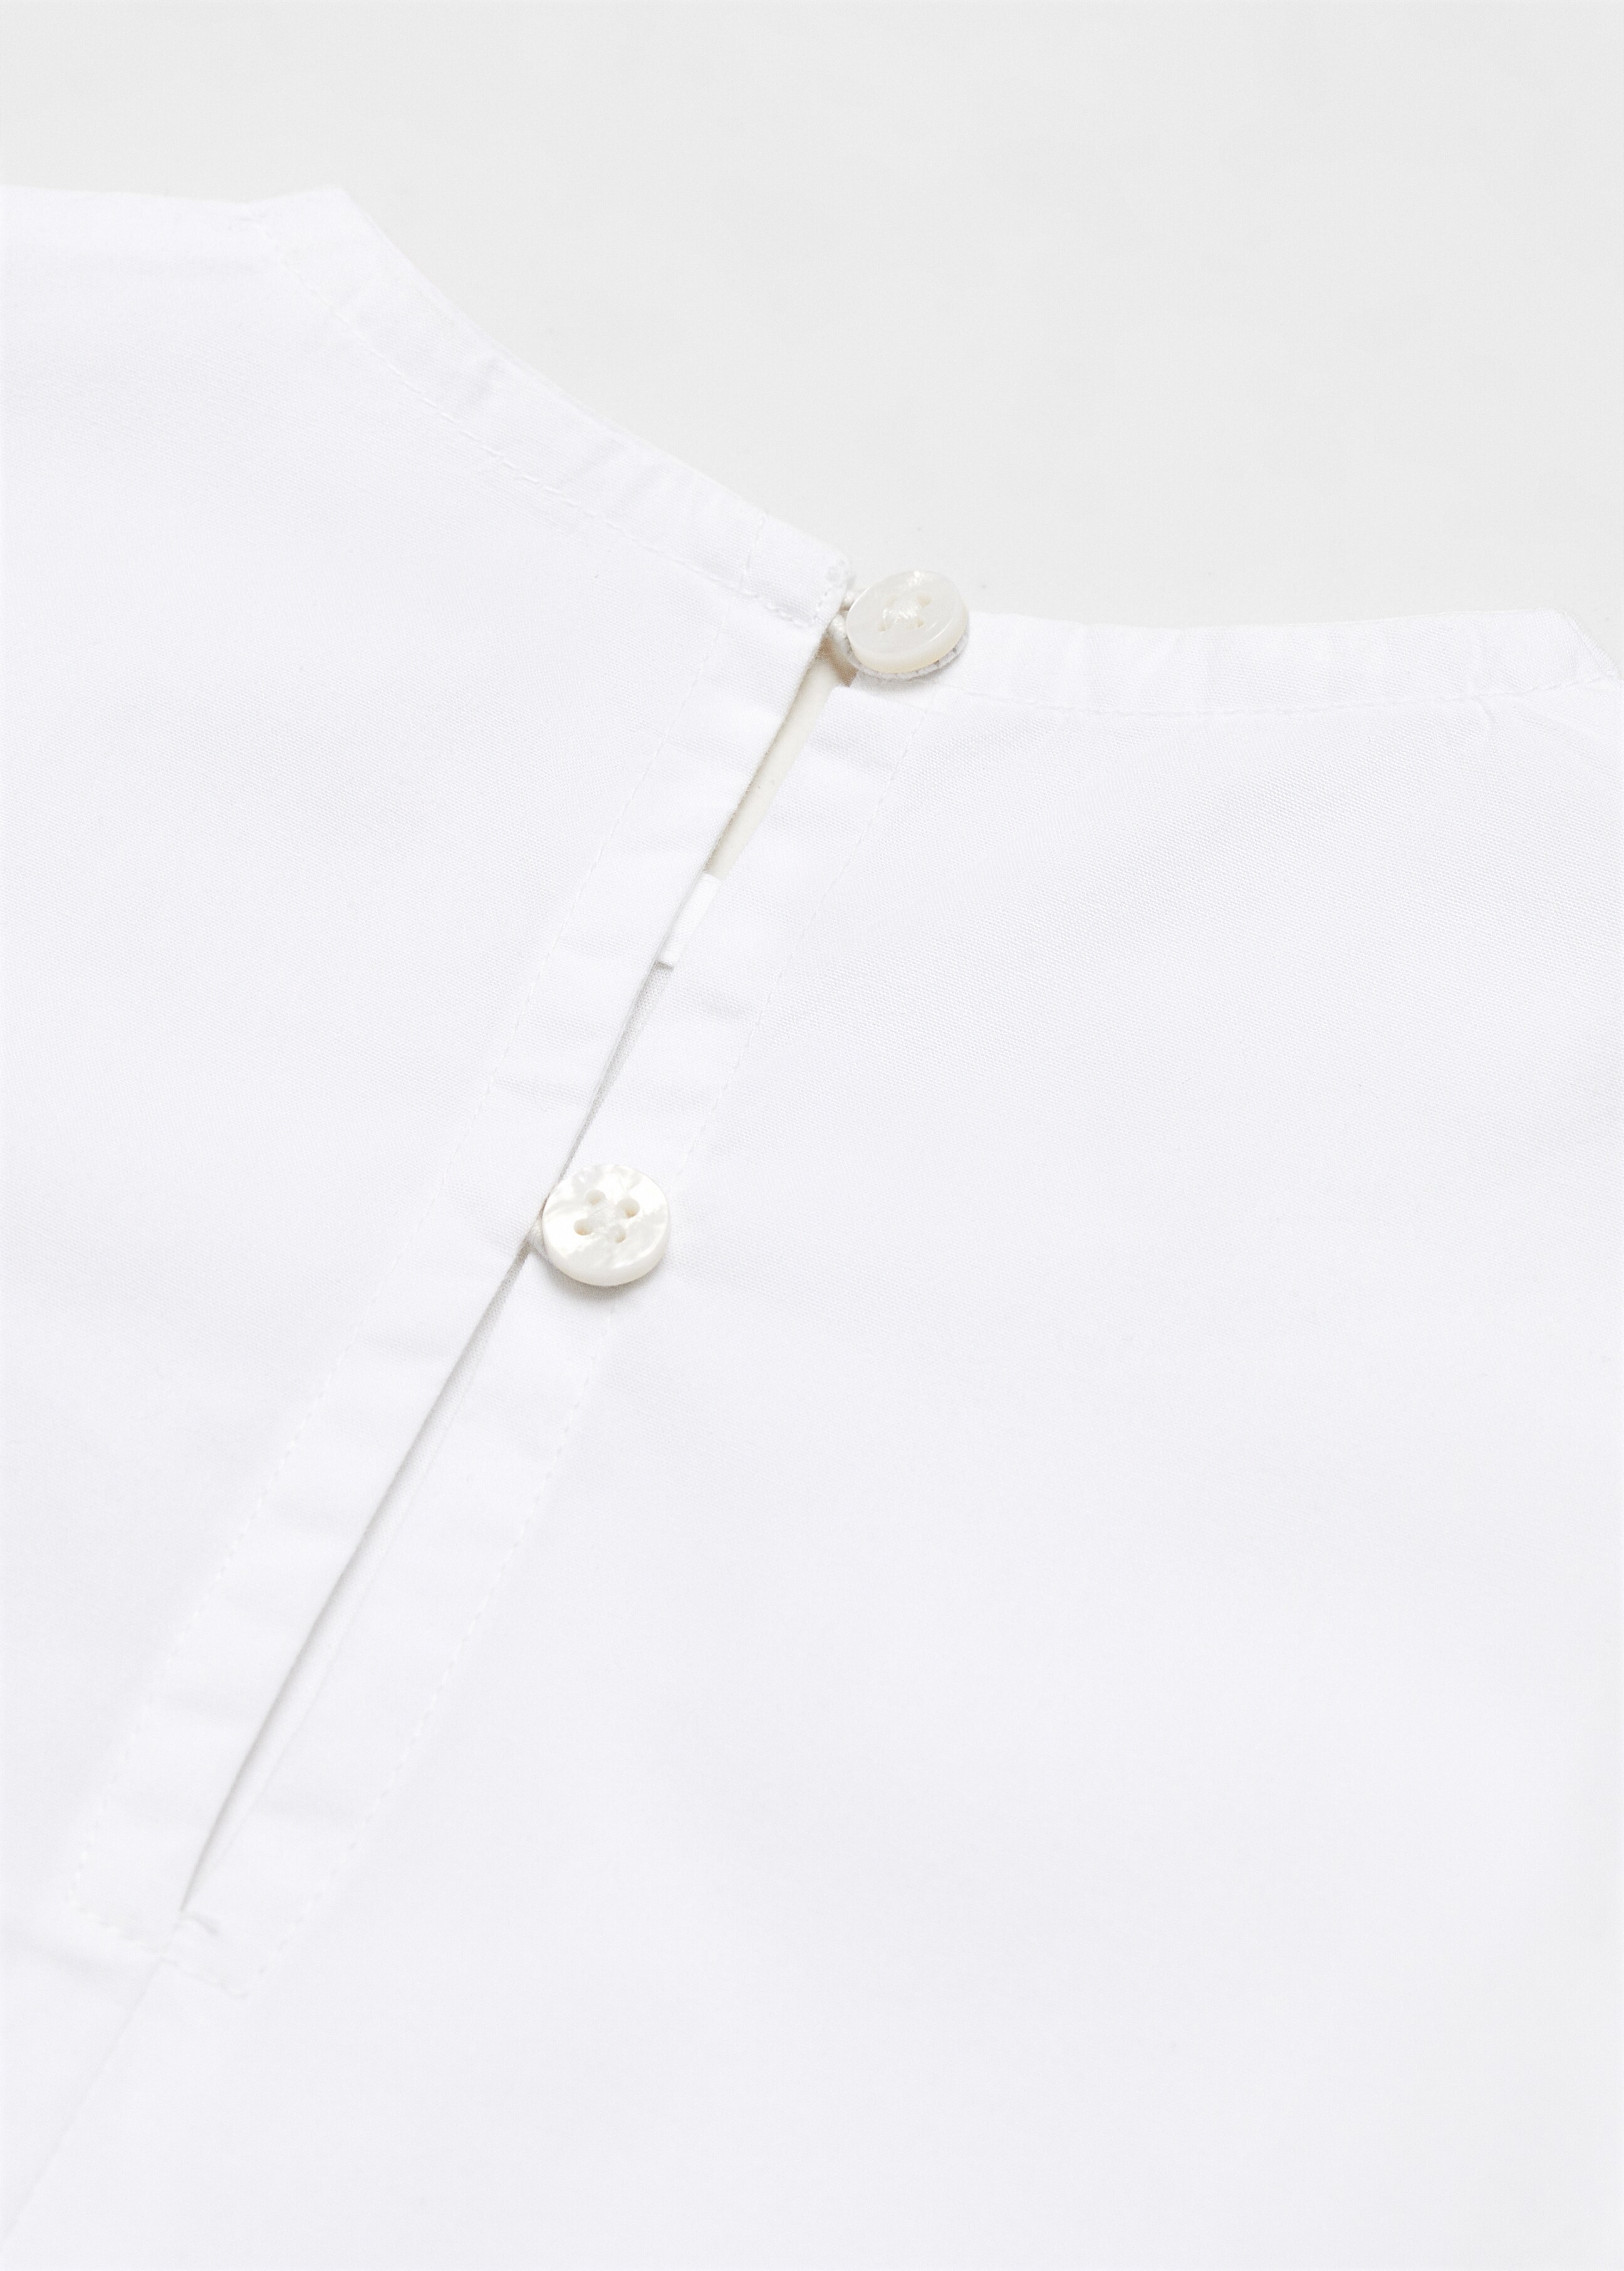 Knotted-hem cotton blouse - Details of the article 8